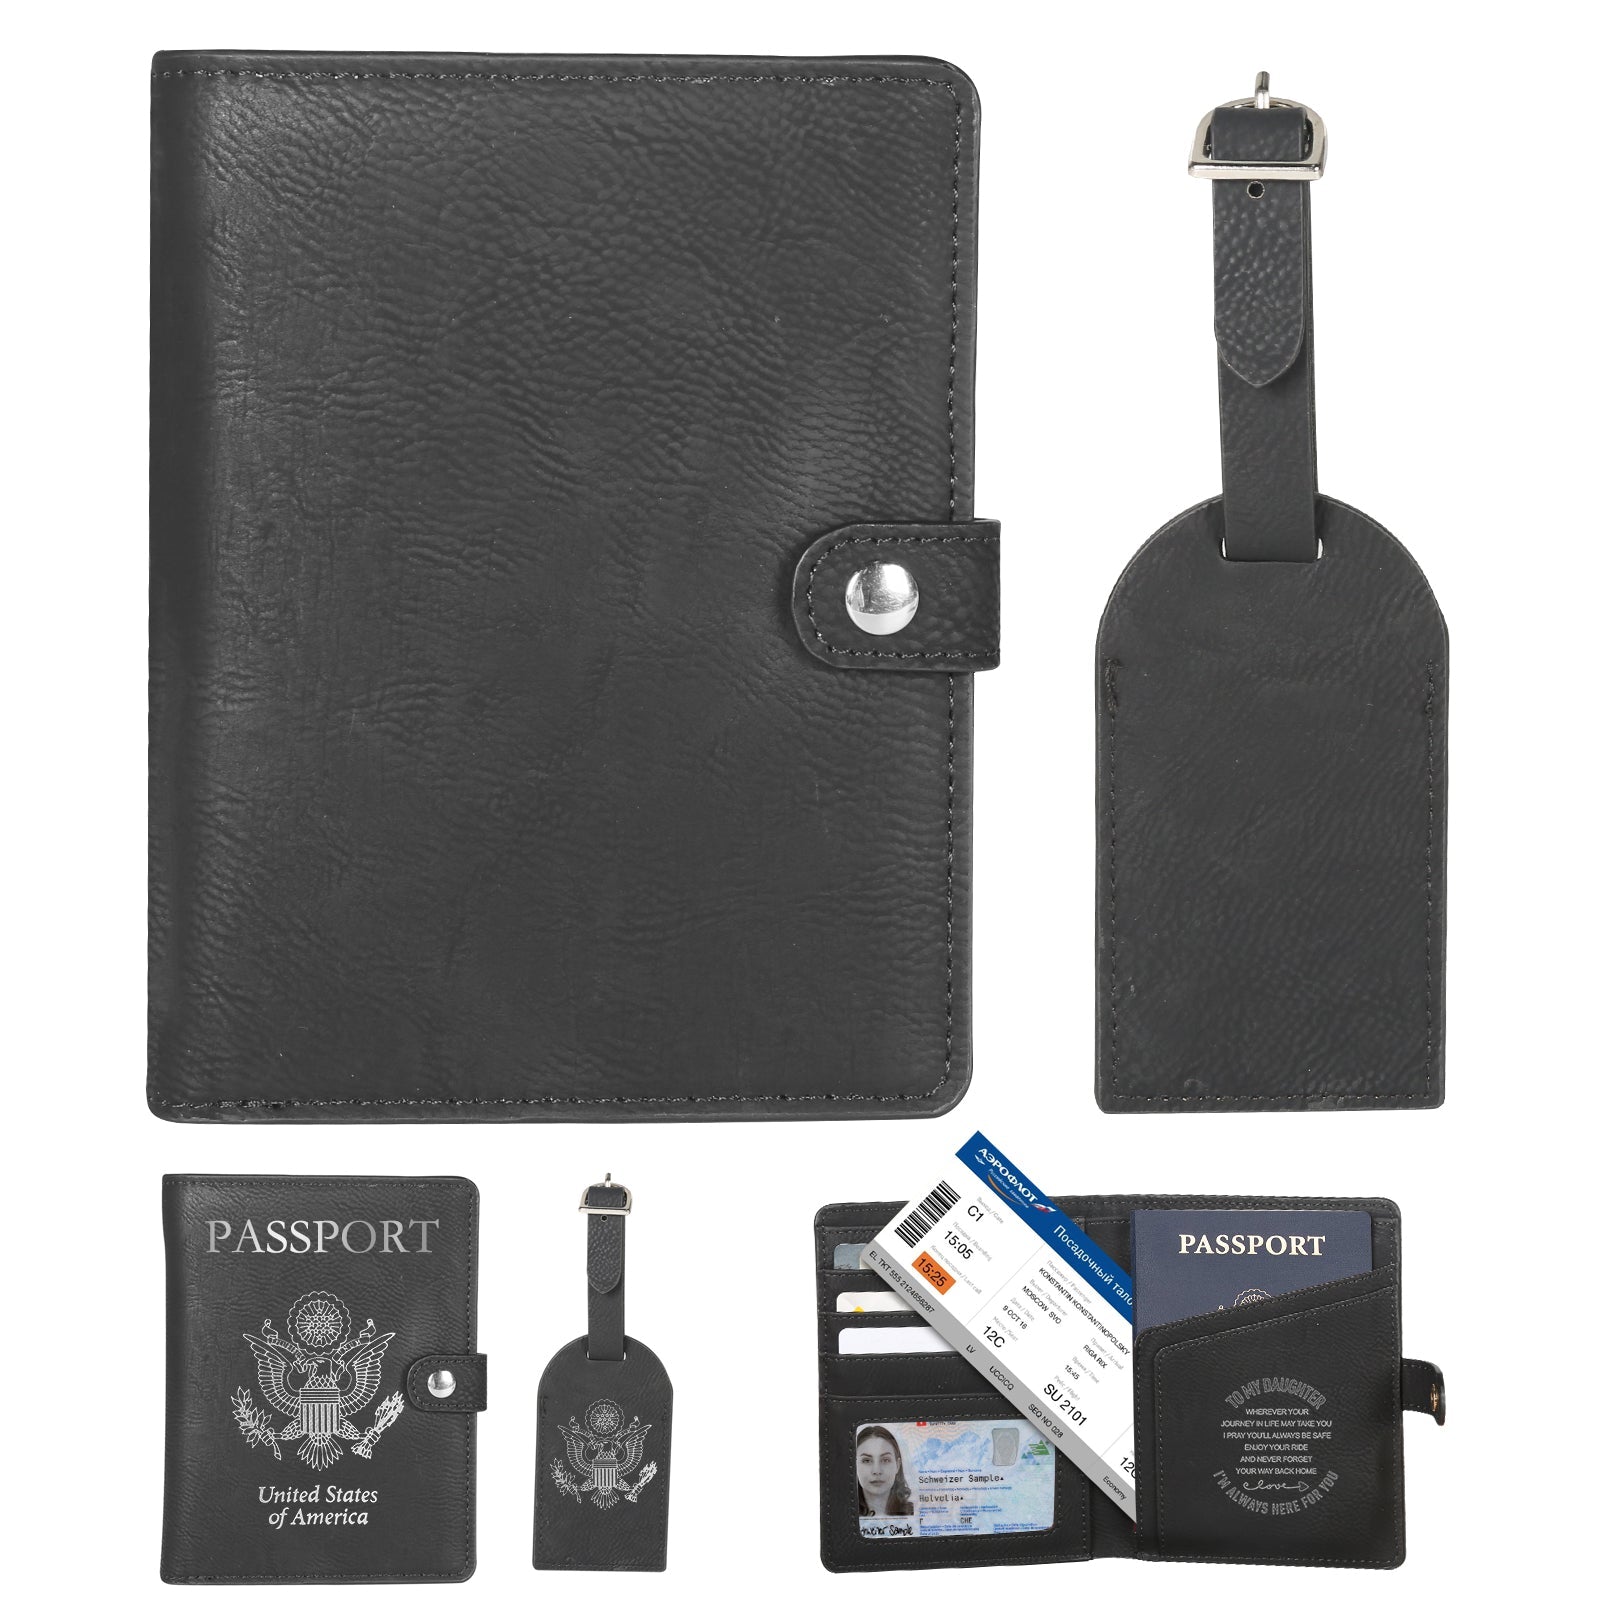 Personalized Leather Passport Holder Travel Wallet and Luggage Tag Set for DIY Laser Engraving